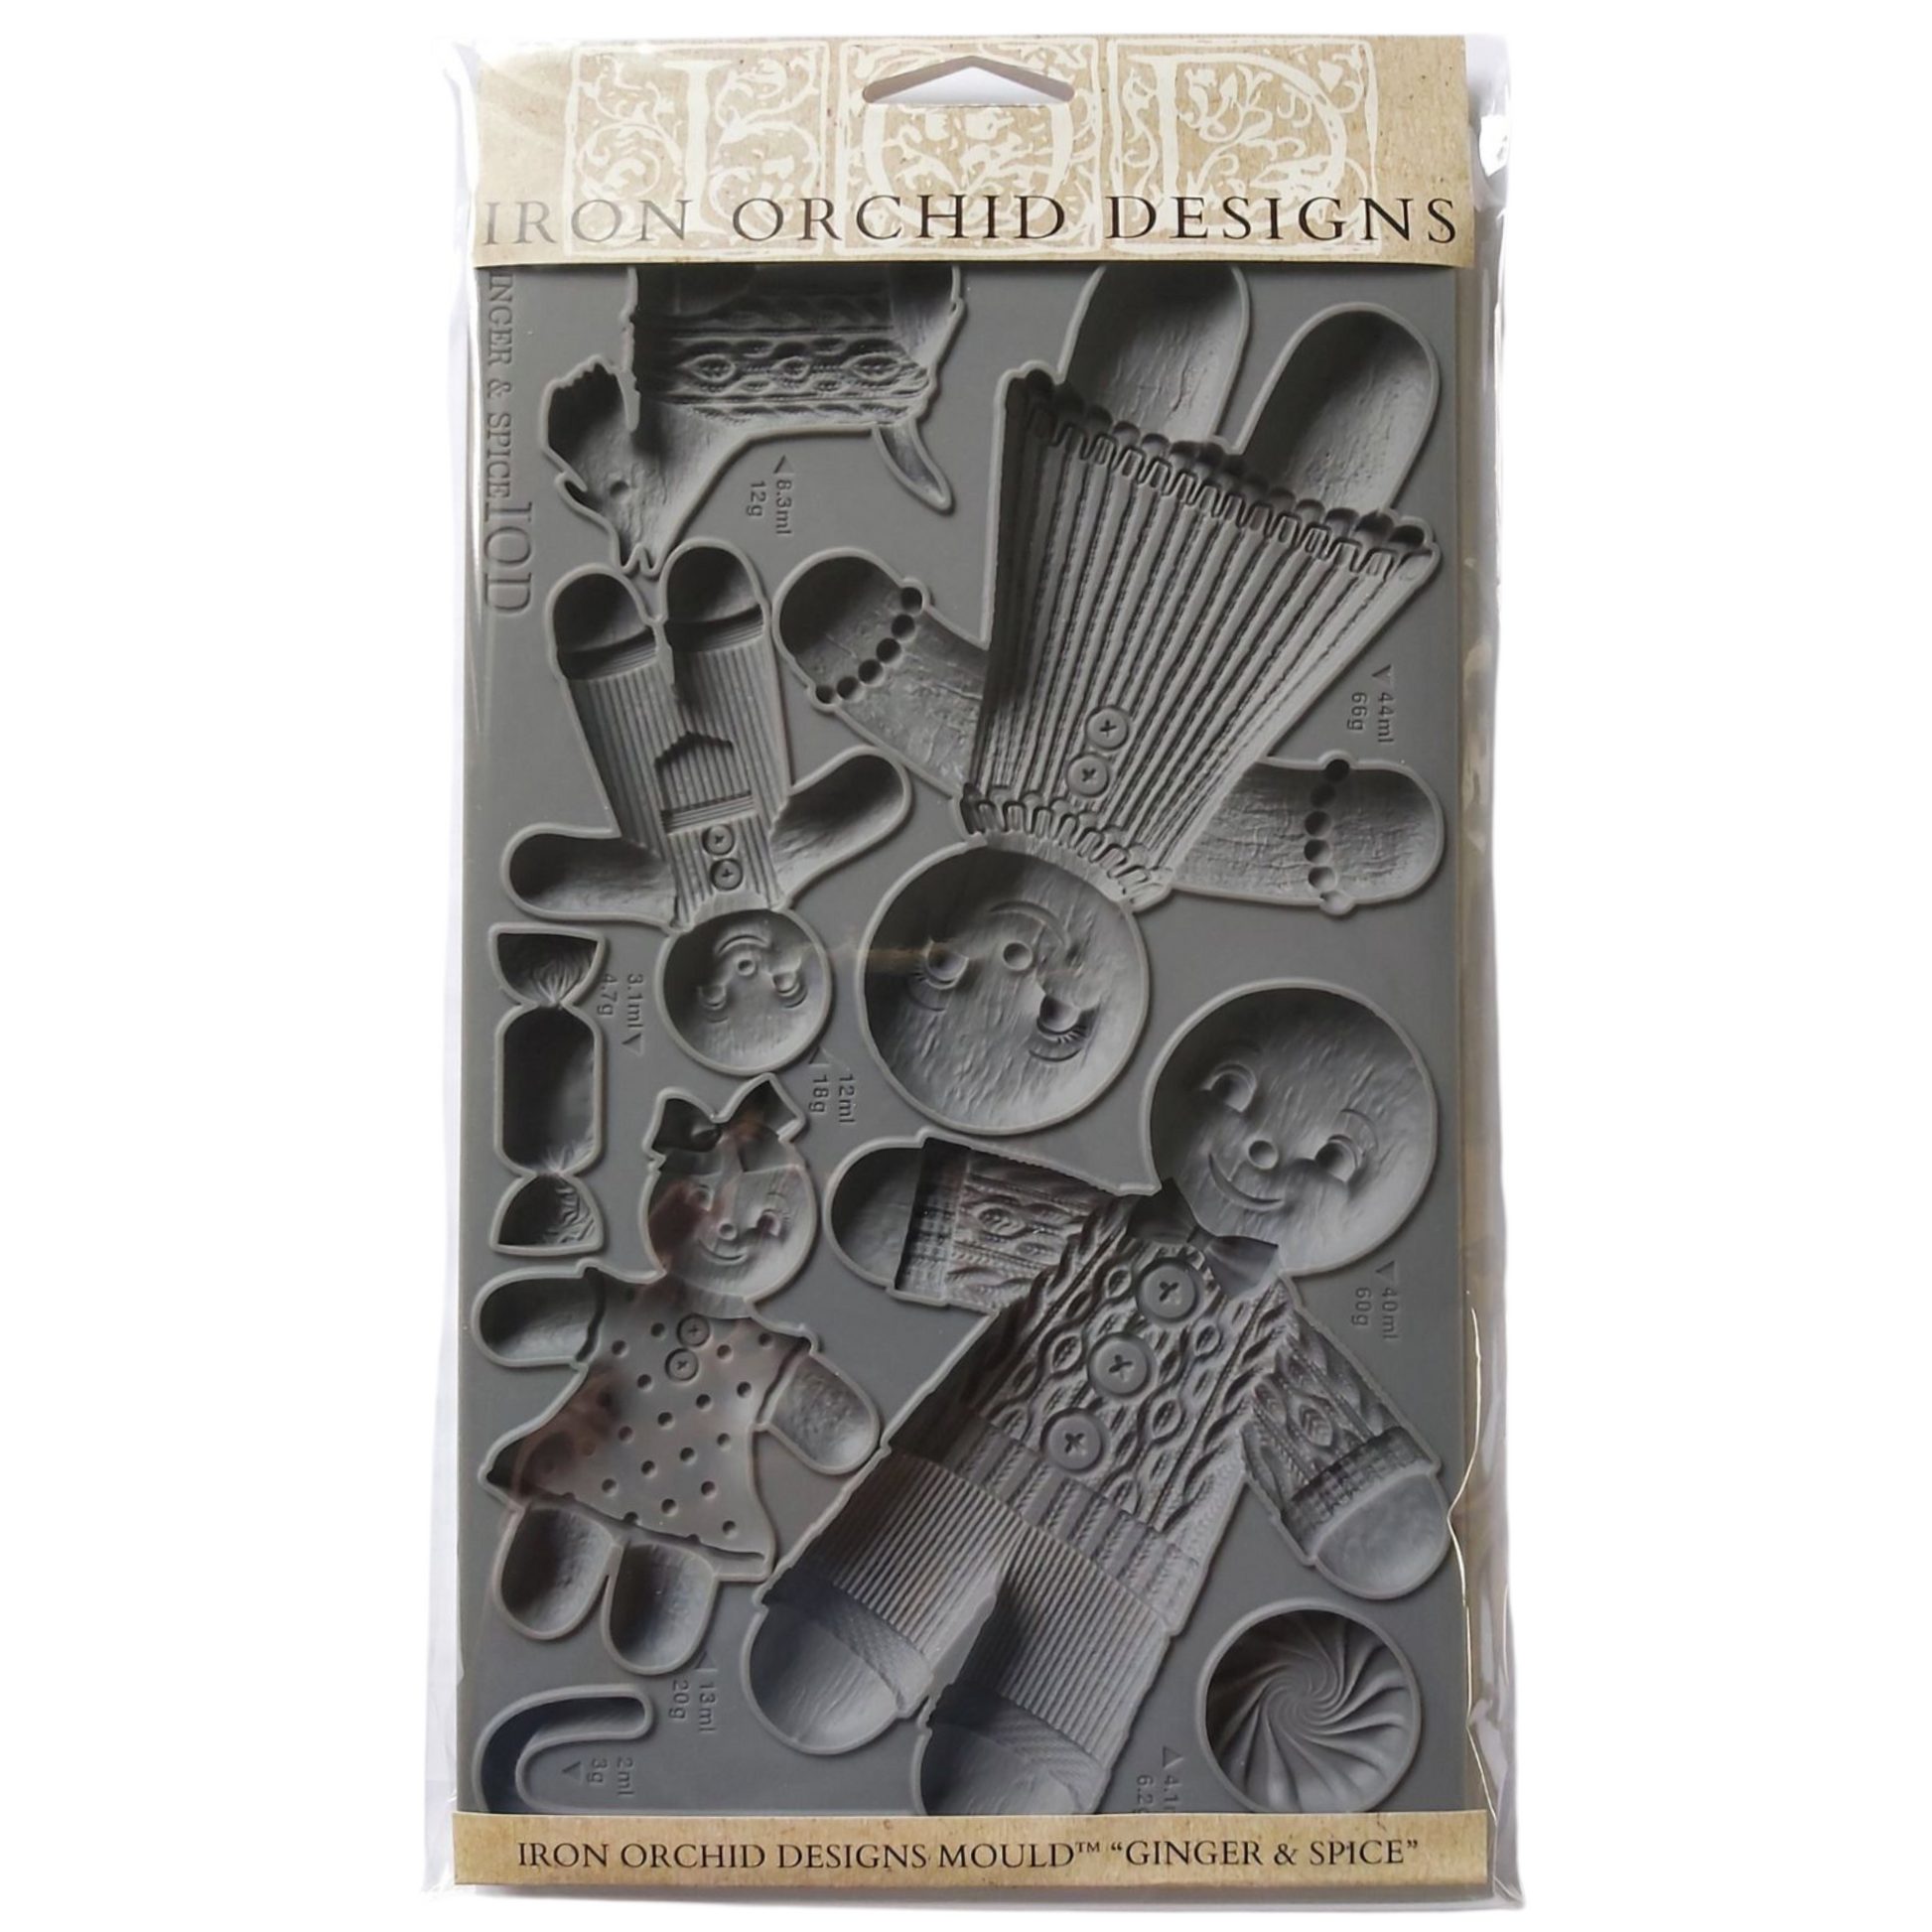 "Ginger & Spice" IOD Mould by Iron Orchid Designs. Front cover. Available at Milton's Daughter.